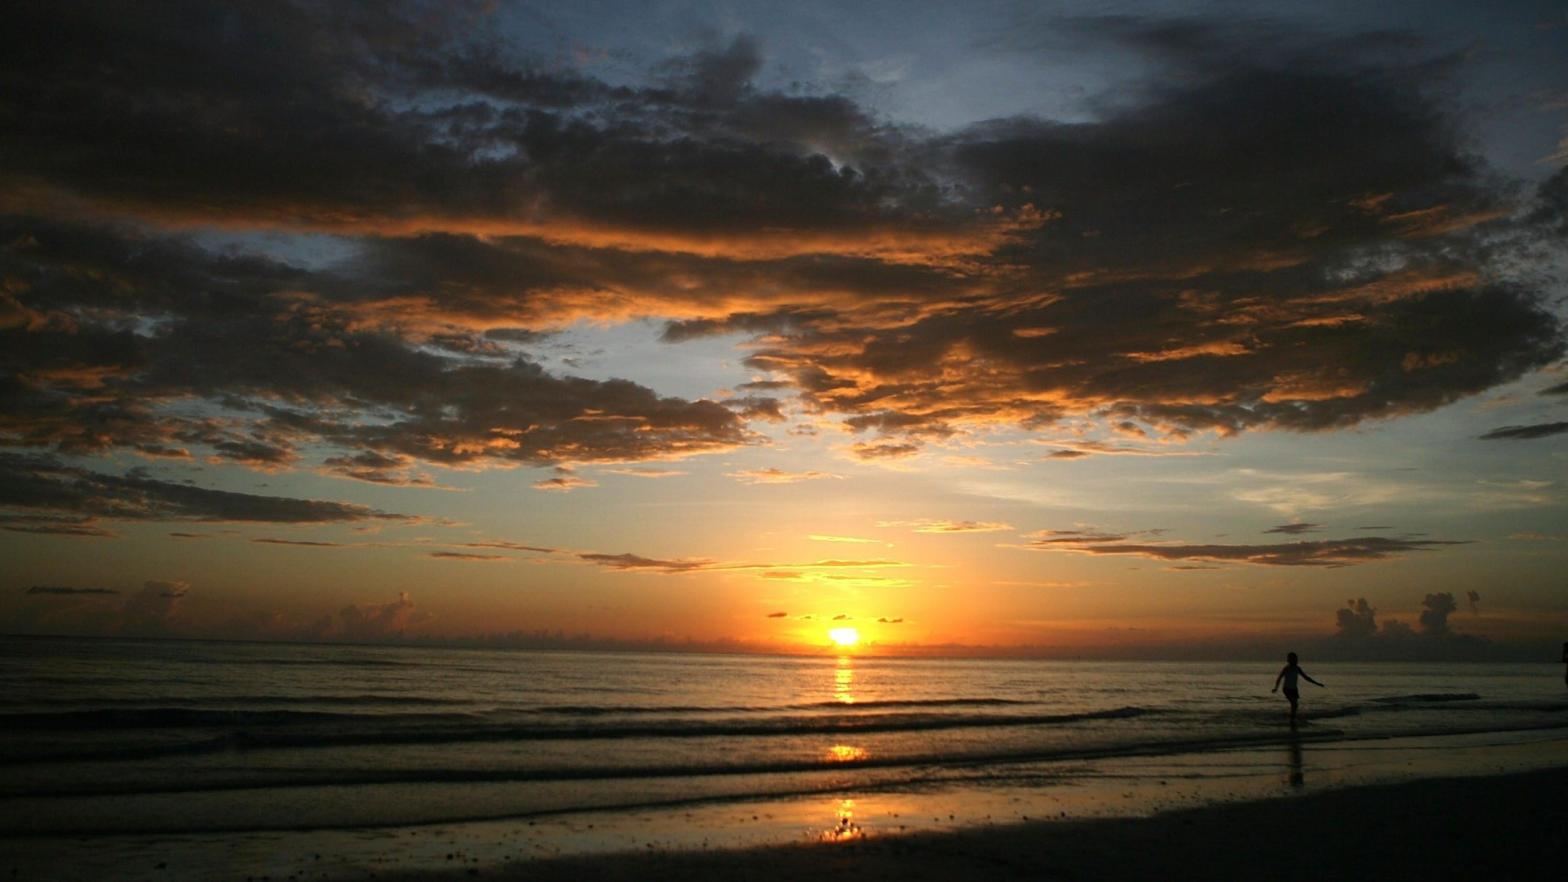 A person walking on the beach during sunset on July 16, 2007 in Marco Island, Florida (Photo: Marc Serota, Getty Images)